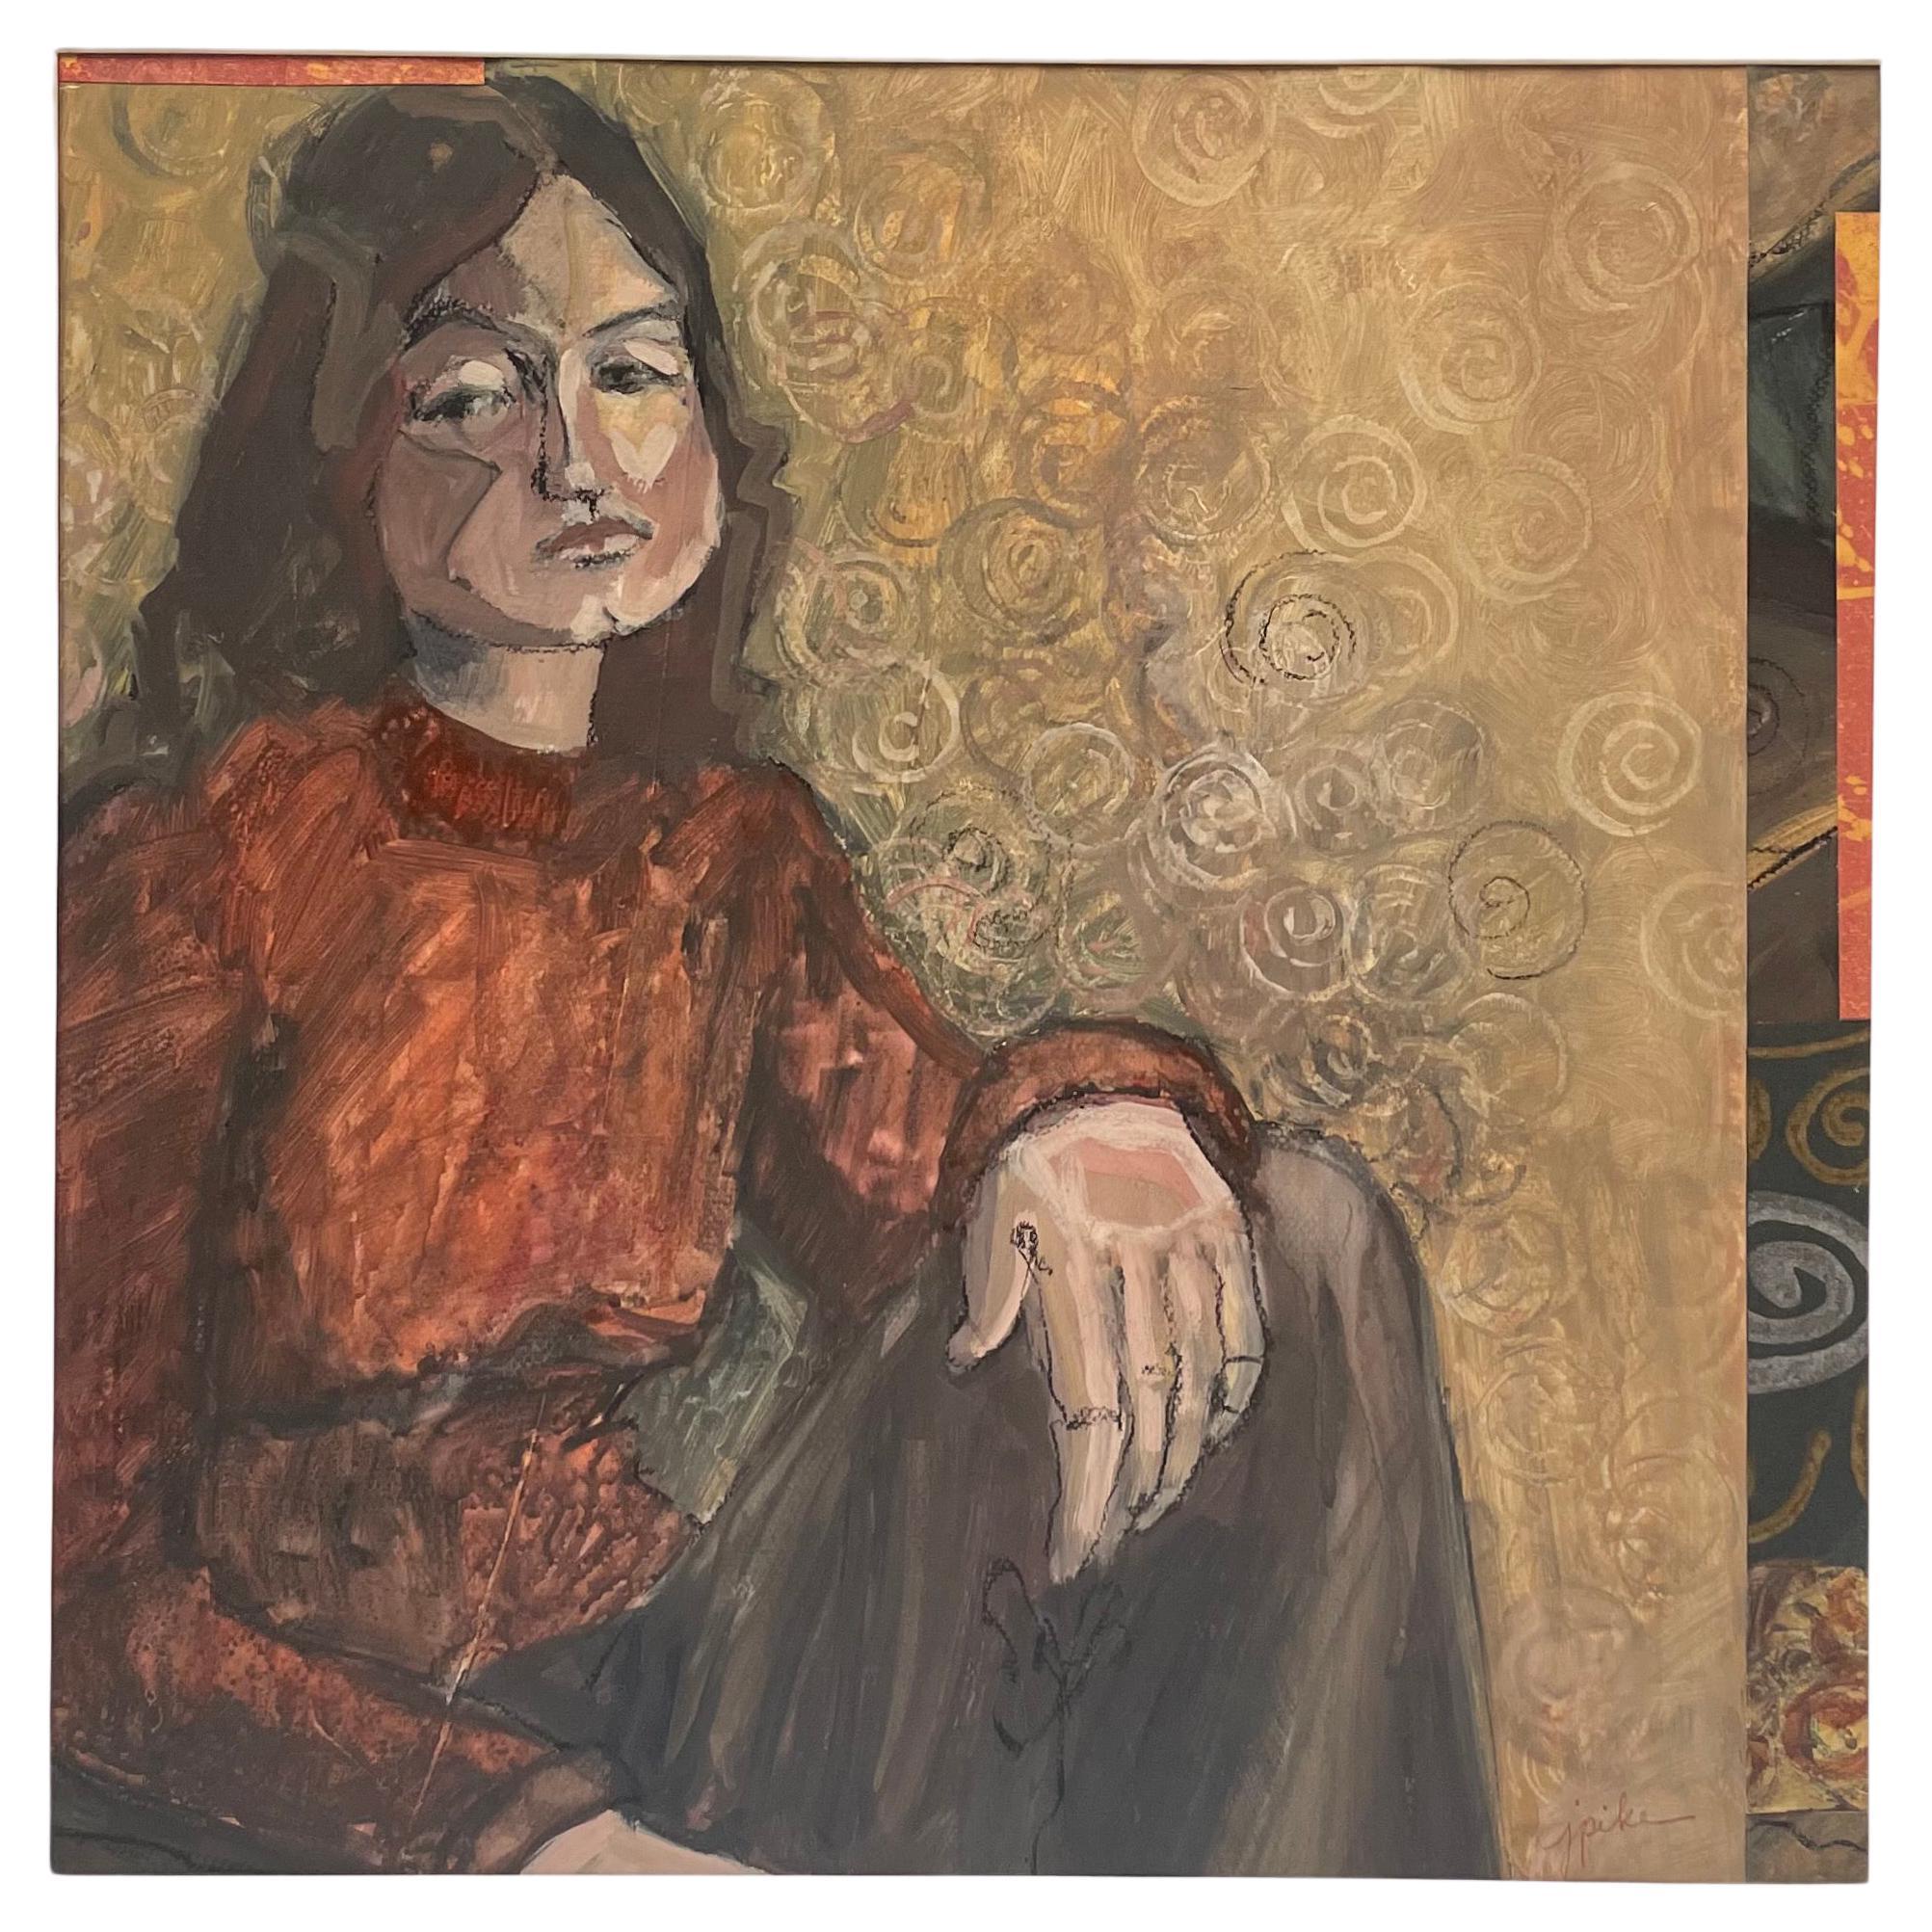 Judith Minna Pike 
December 19, 1942- October 18, 2019
Mixed media painting of a young thoughful woman, sitting comfortably. Pike used many different brush techniques when painting this portrait. Up close you can see repeated spirals of paint,